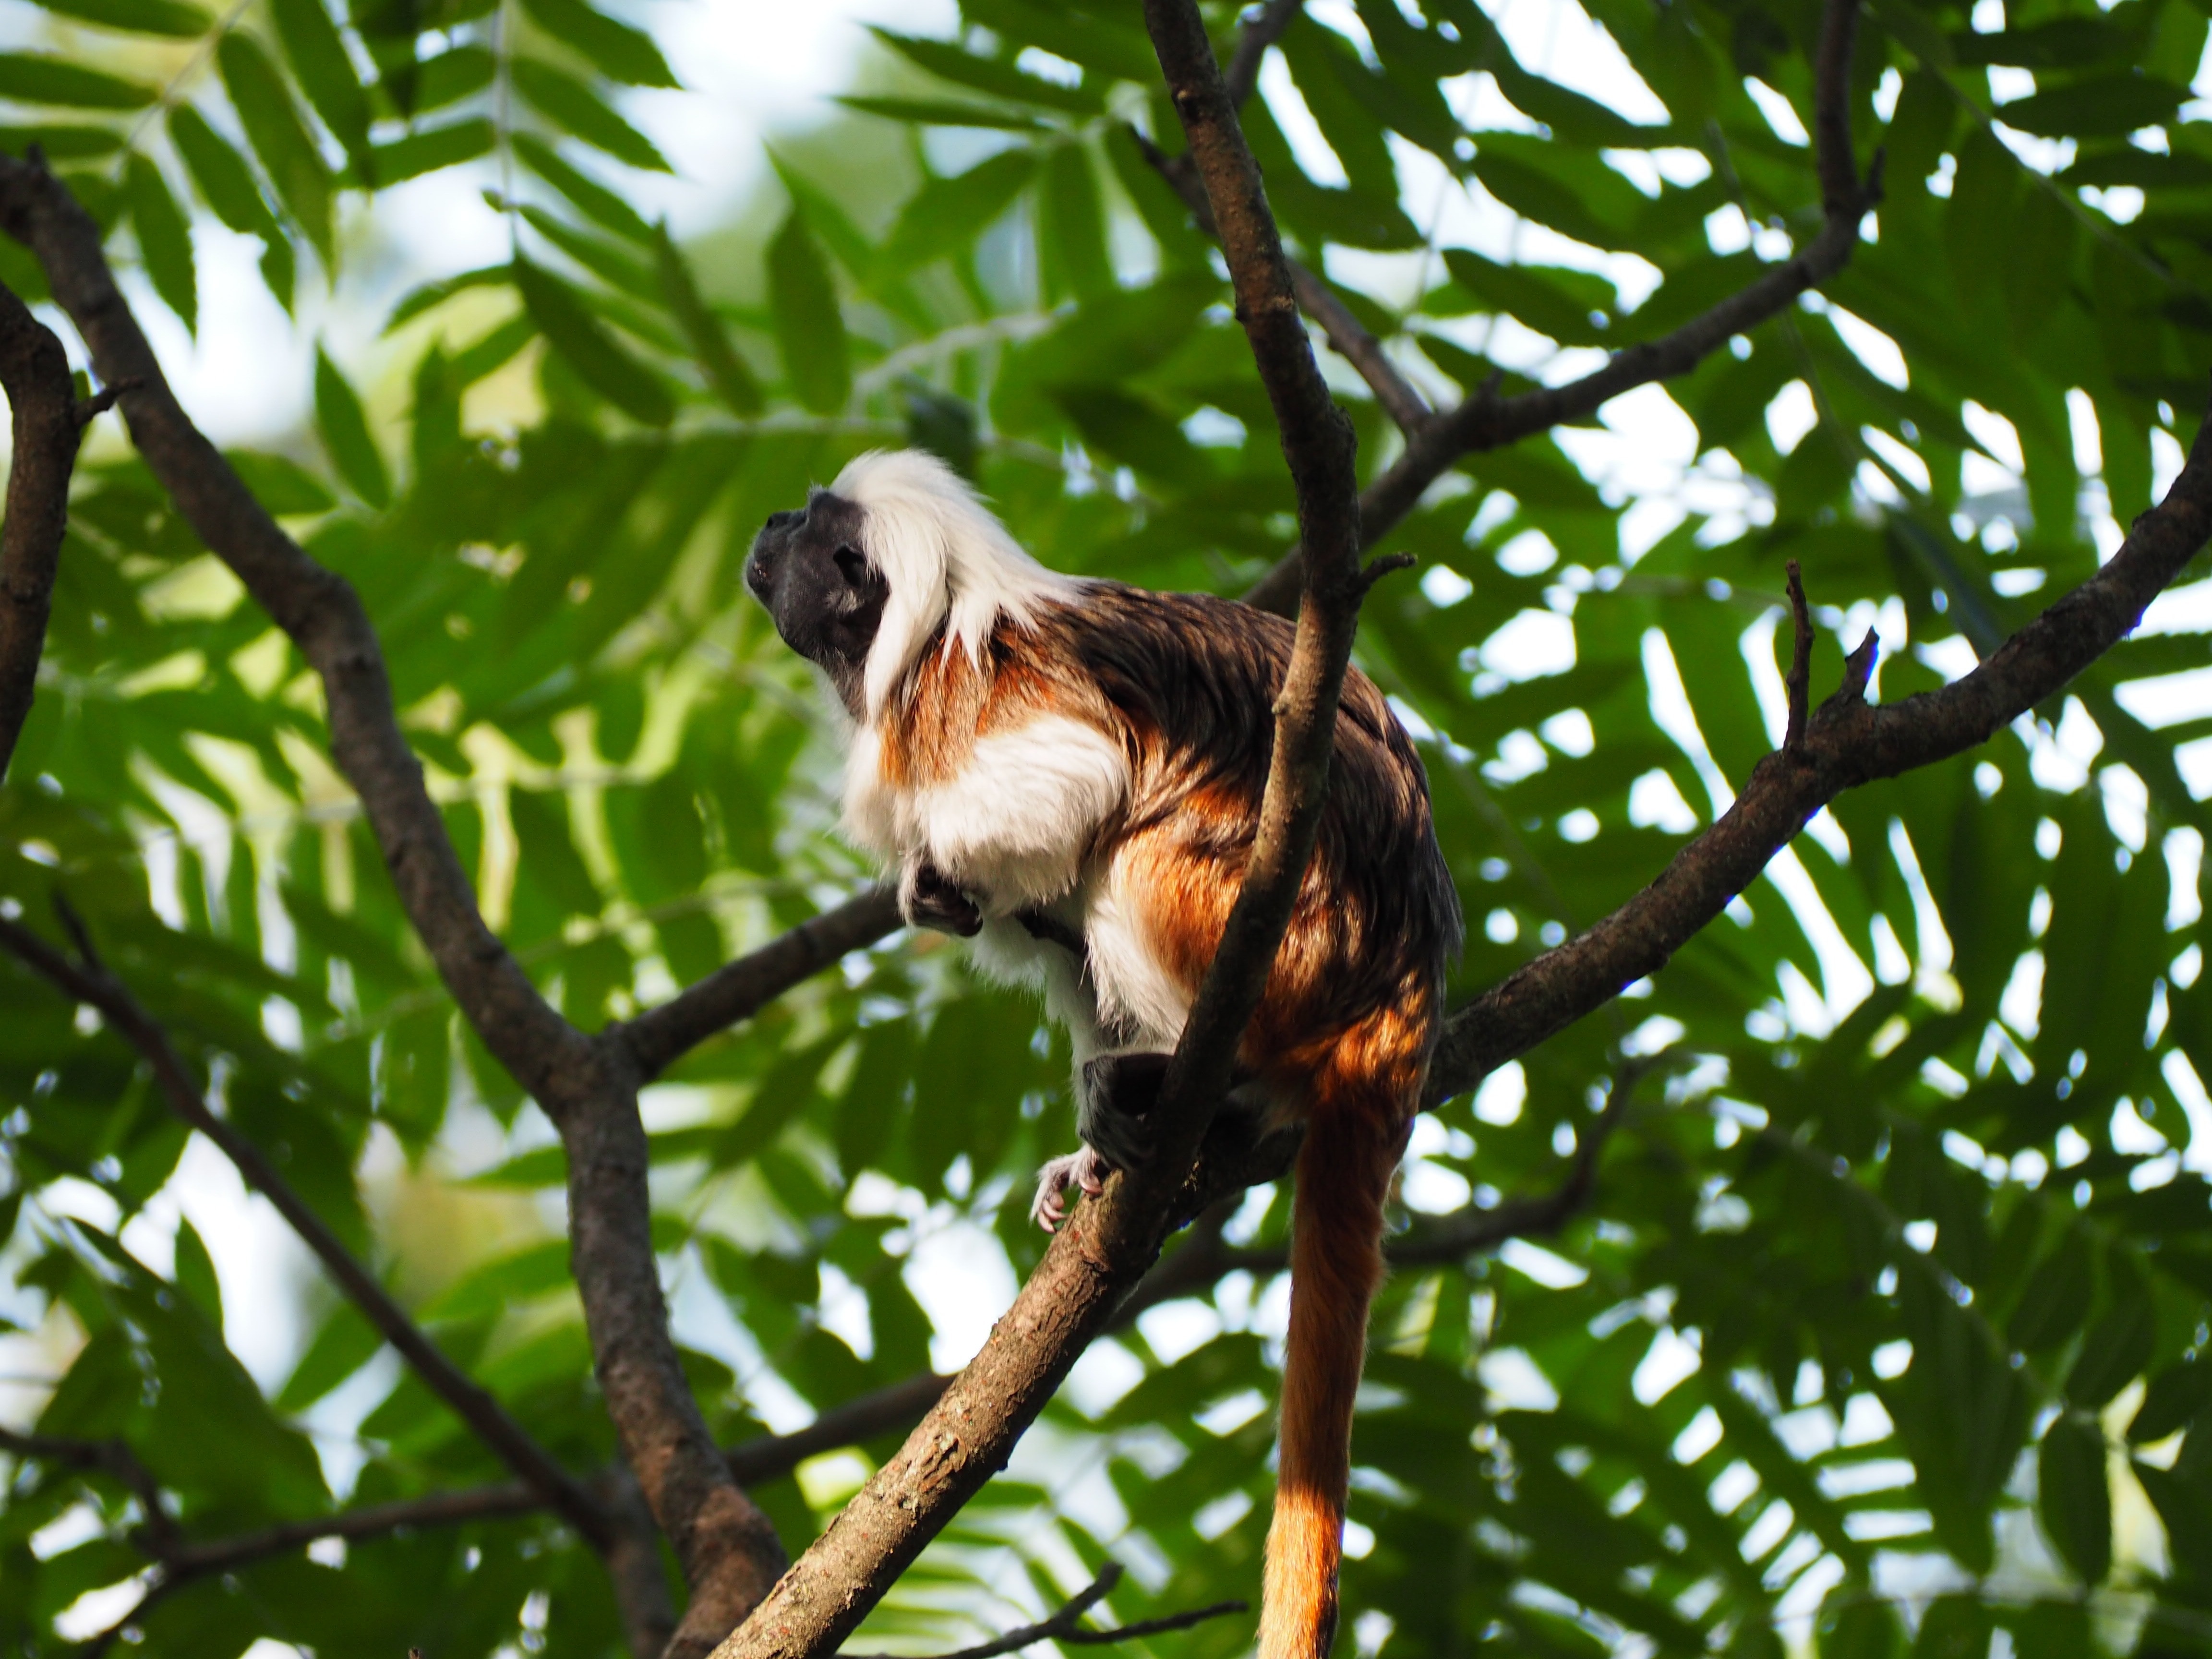 white and brown monkey on tree during daytime